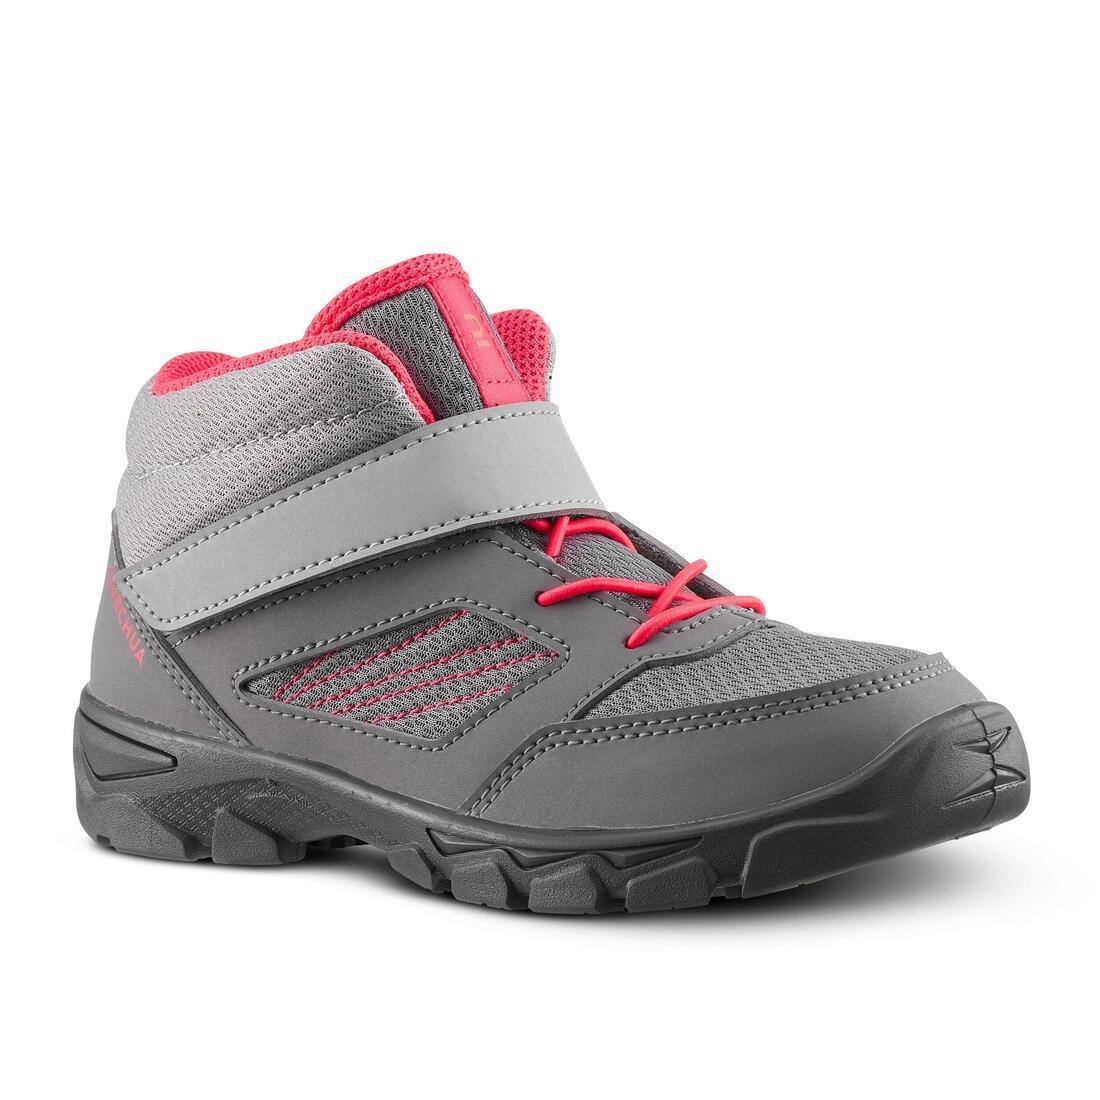 QUECHUA - Kids Girl Hiking Shoes With Rip-Tab Mh100 Mid From Jr Size 7 To Size 2, Grey